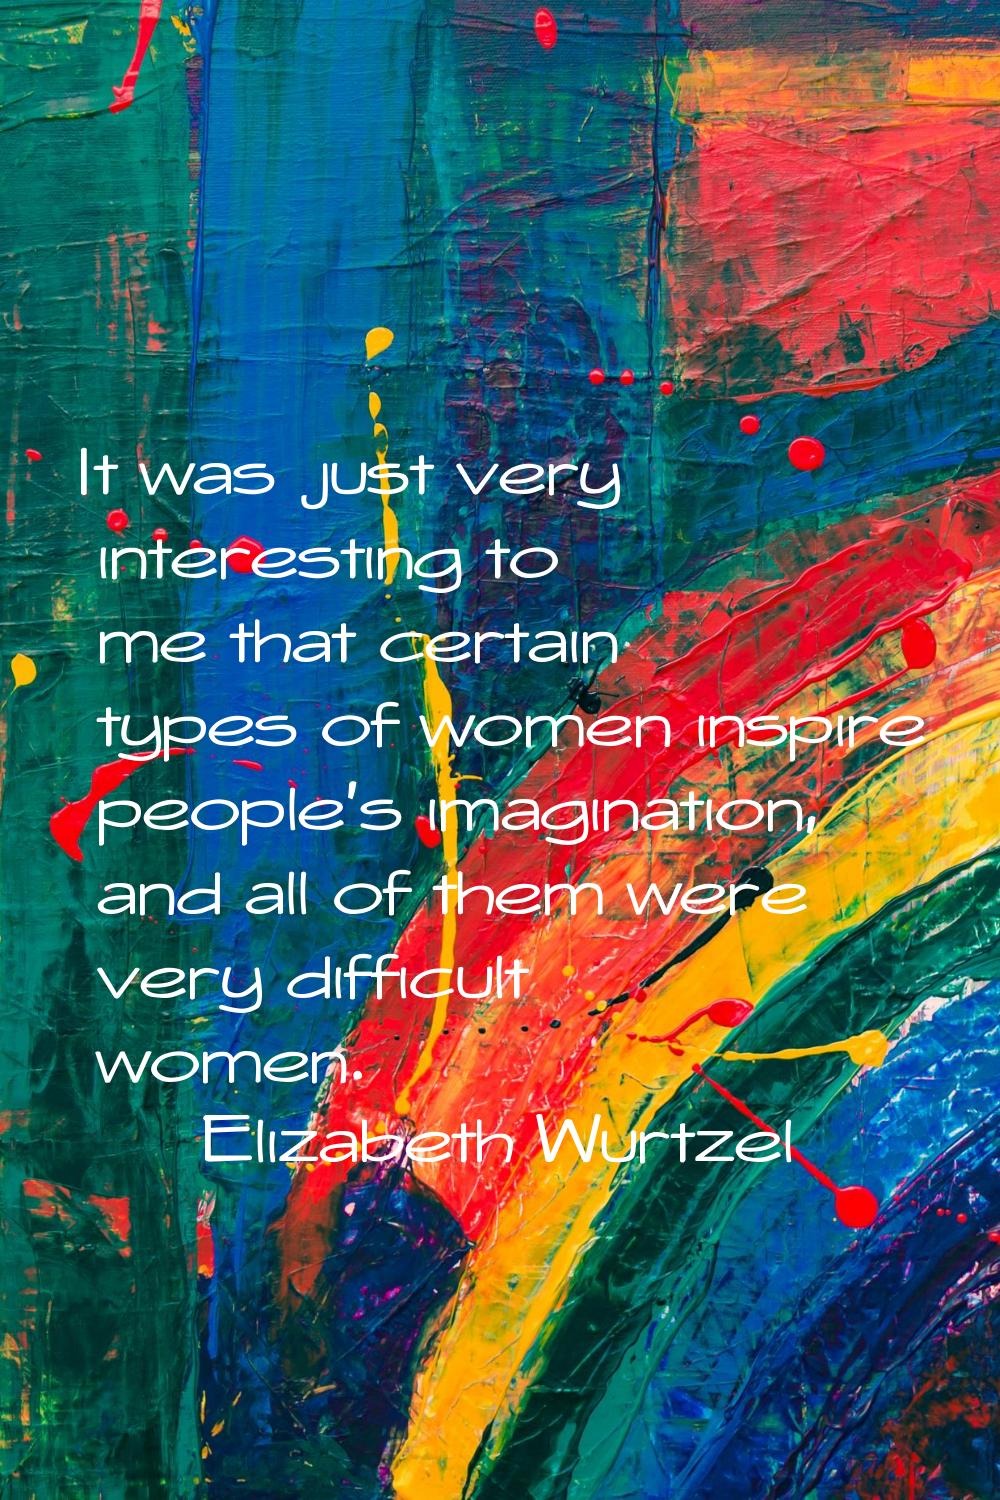 It was just very interesting to me that certain types of women inspire people's imagination, and al